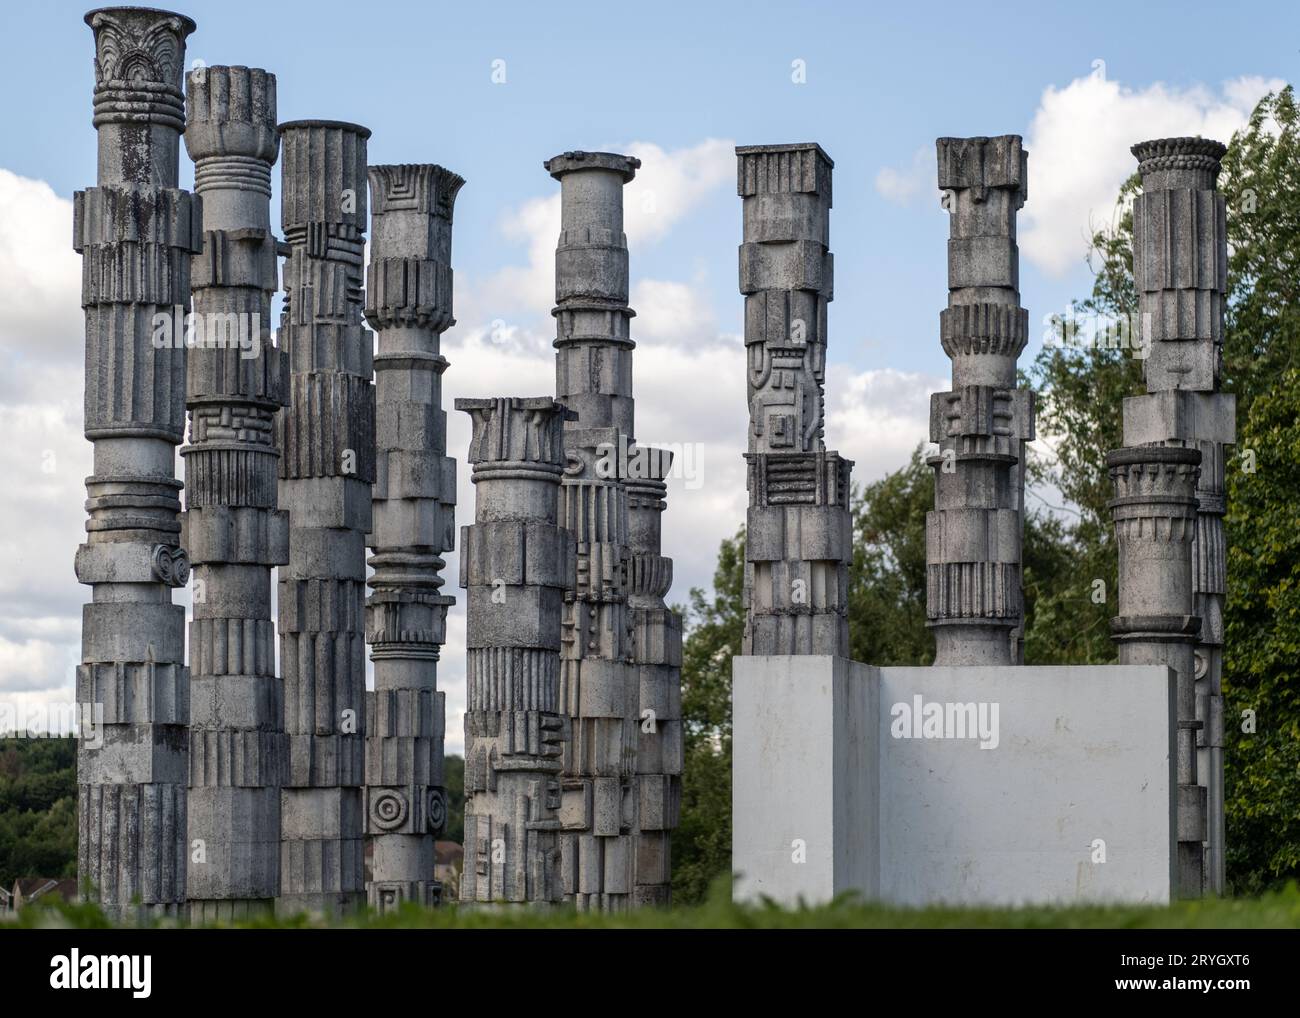 New town art 'Heritage' by artist David Harding, is made up of several concrete sculptures, located Glenrothes town park. 2023 Stock Photo